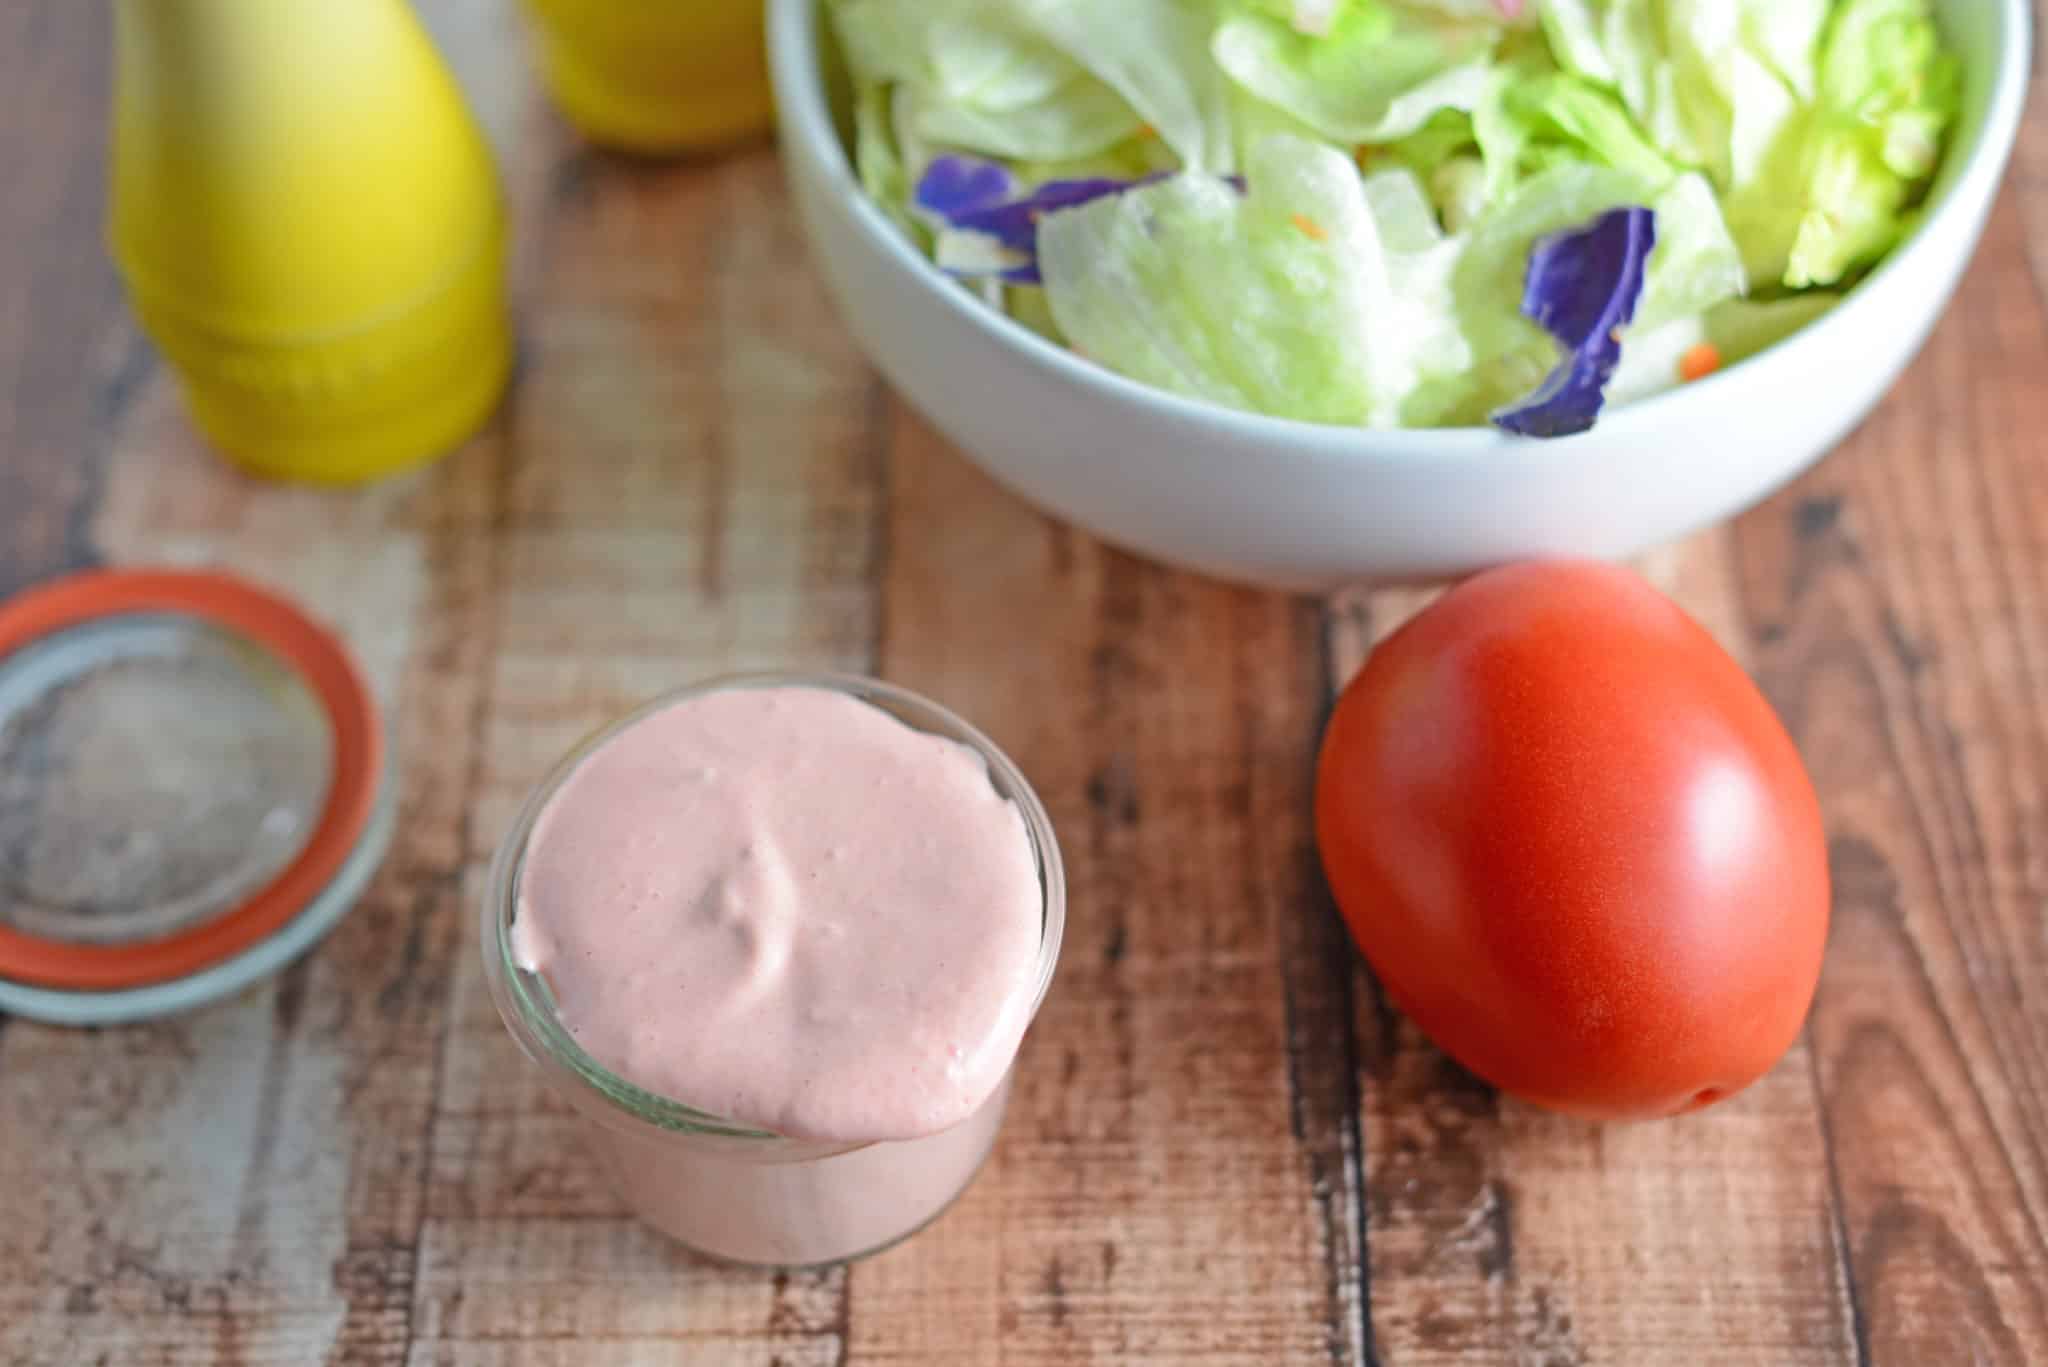 Creamy Tomato Salad Dressing Recipe - this homemade salad dressing can also be used to baste veggies on the grill or as a dipping sauce for a veggie tray. Uses fresh tomatoes with zesty lemon juice and Dijon mustard. www.savoryexperiments.com